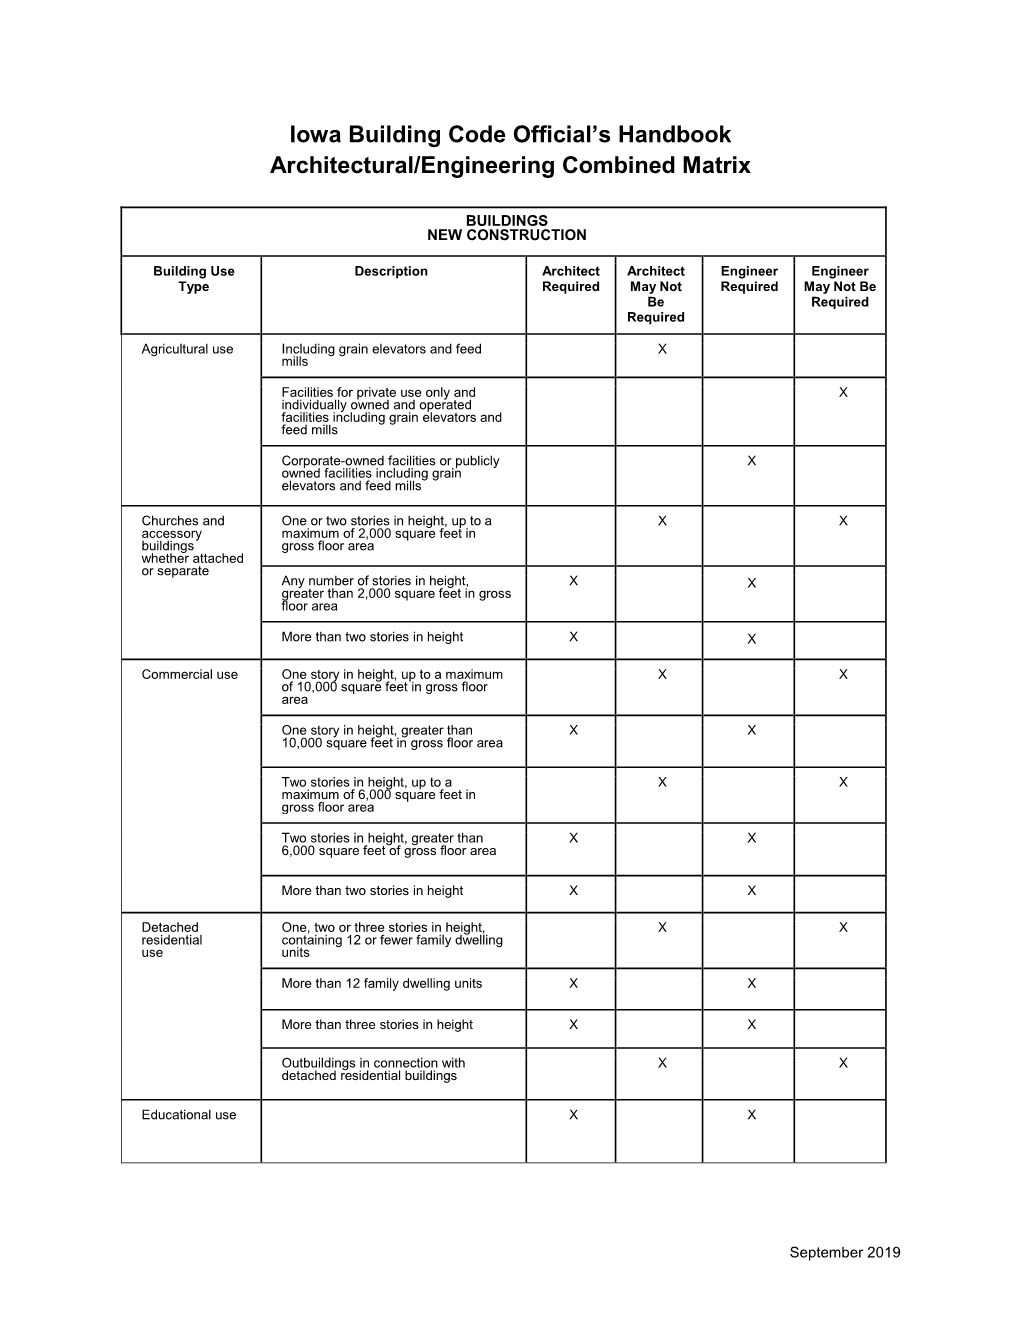 Architectural-Engineering Combined Matrix.Pdf